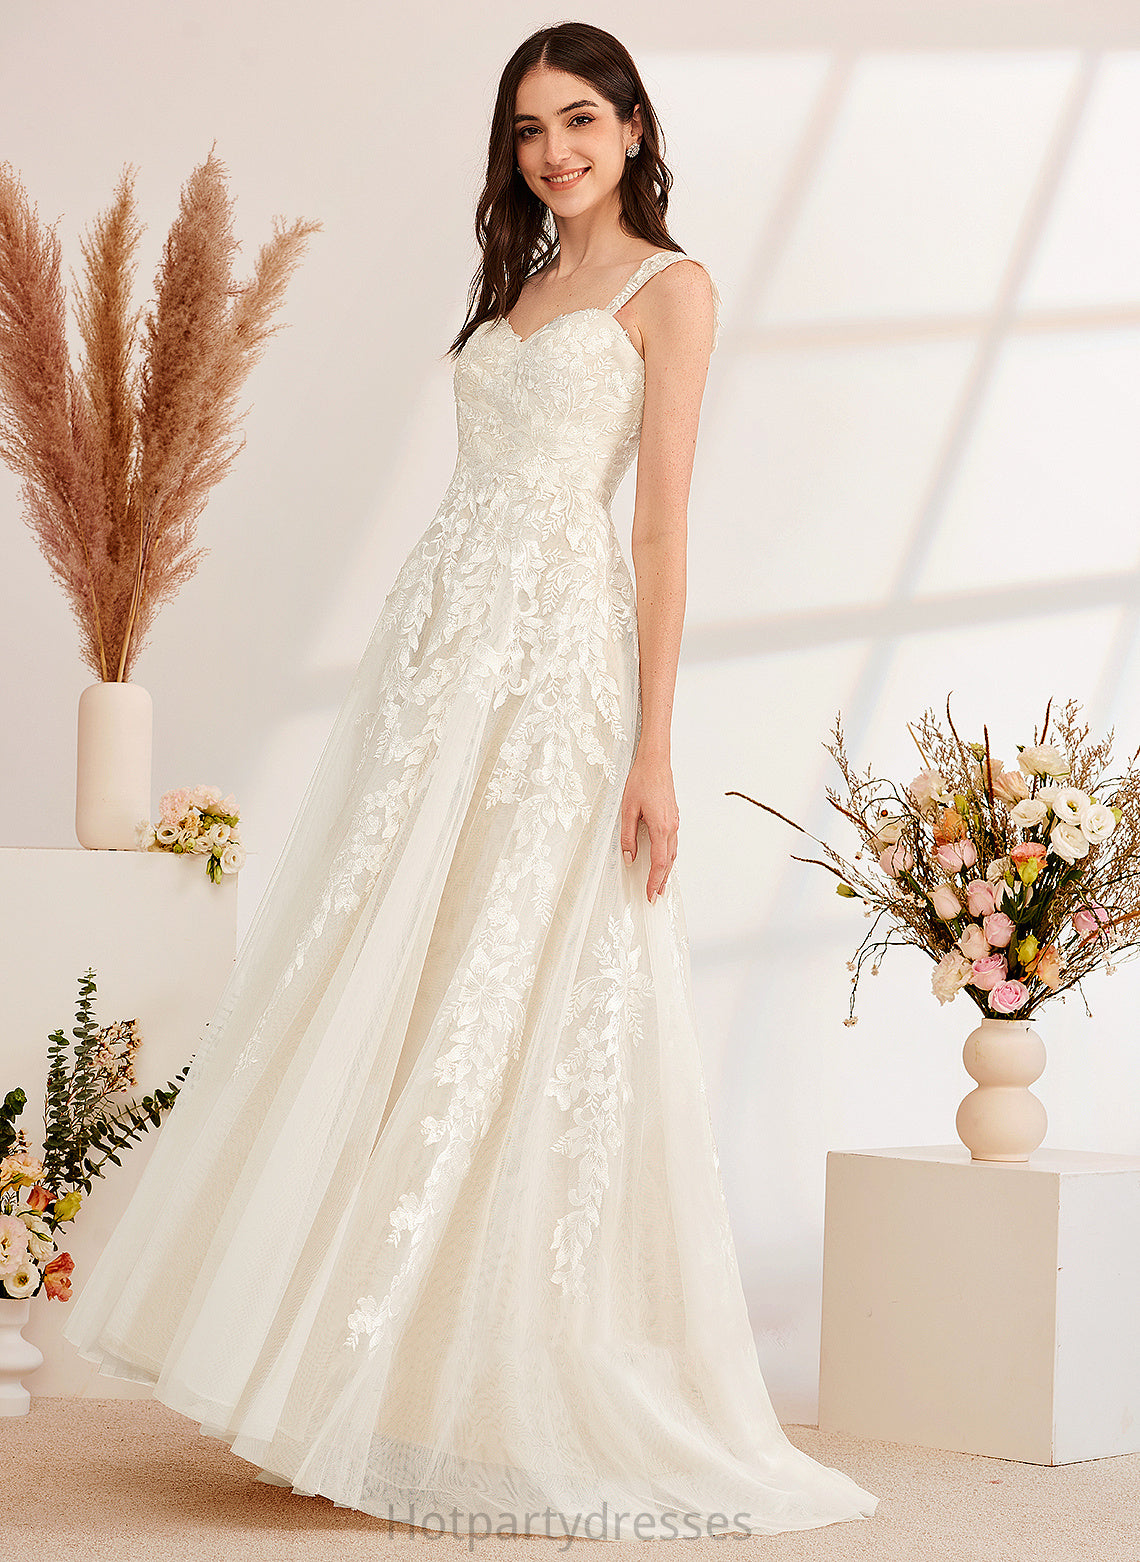 Sweep Beading A-Line Sequins Off-the-Shoulder Wedding Train Dress Amiya Wedding Dresses With